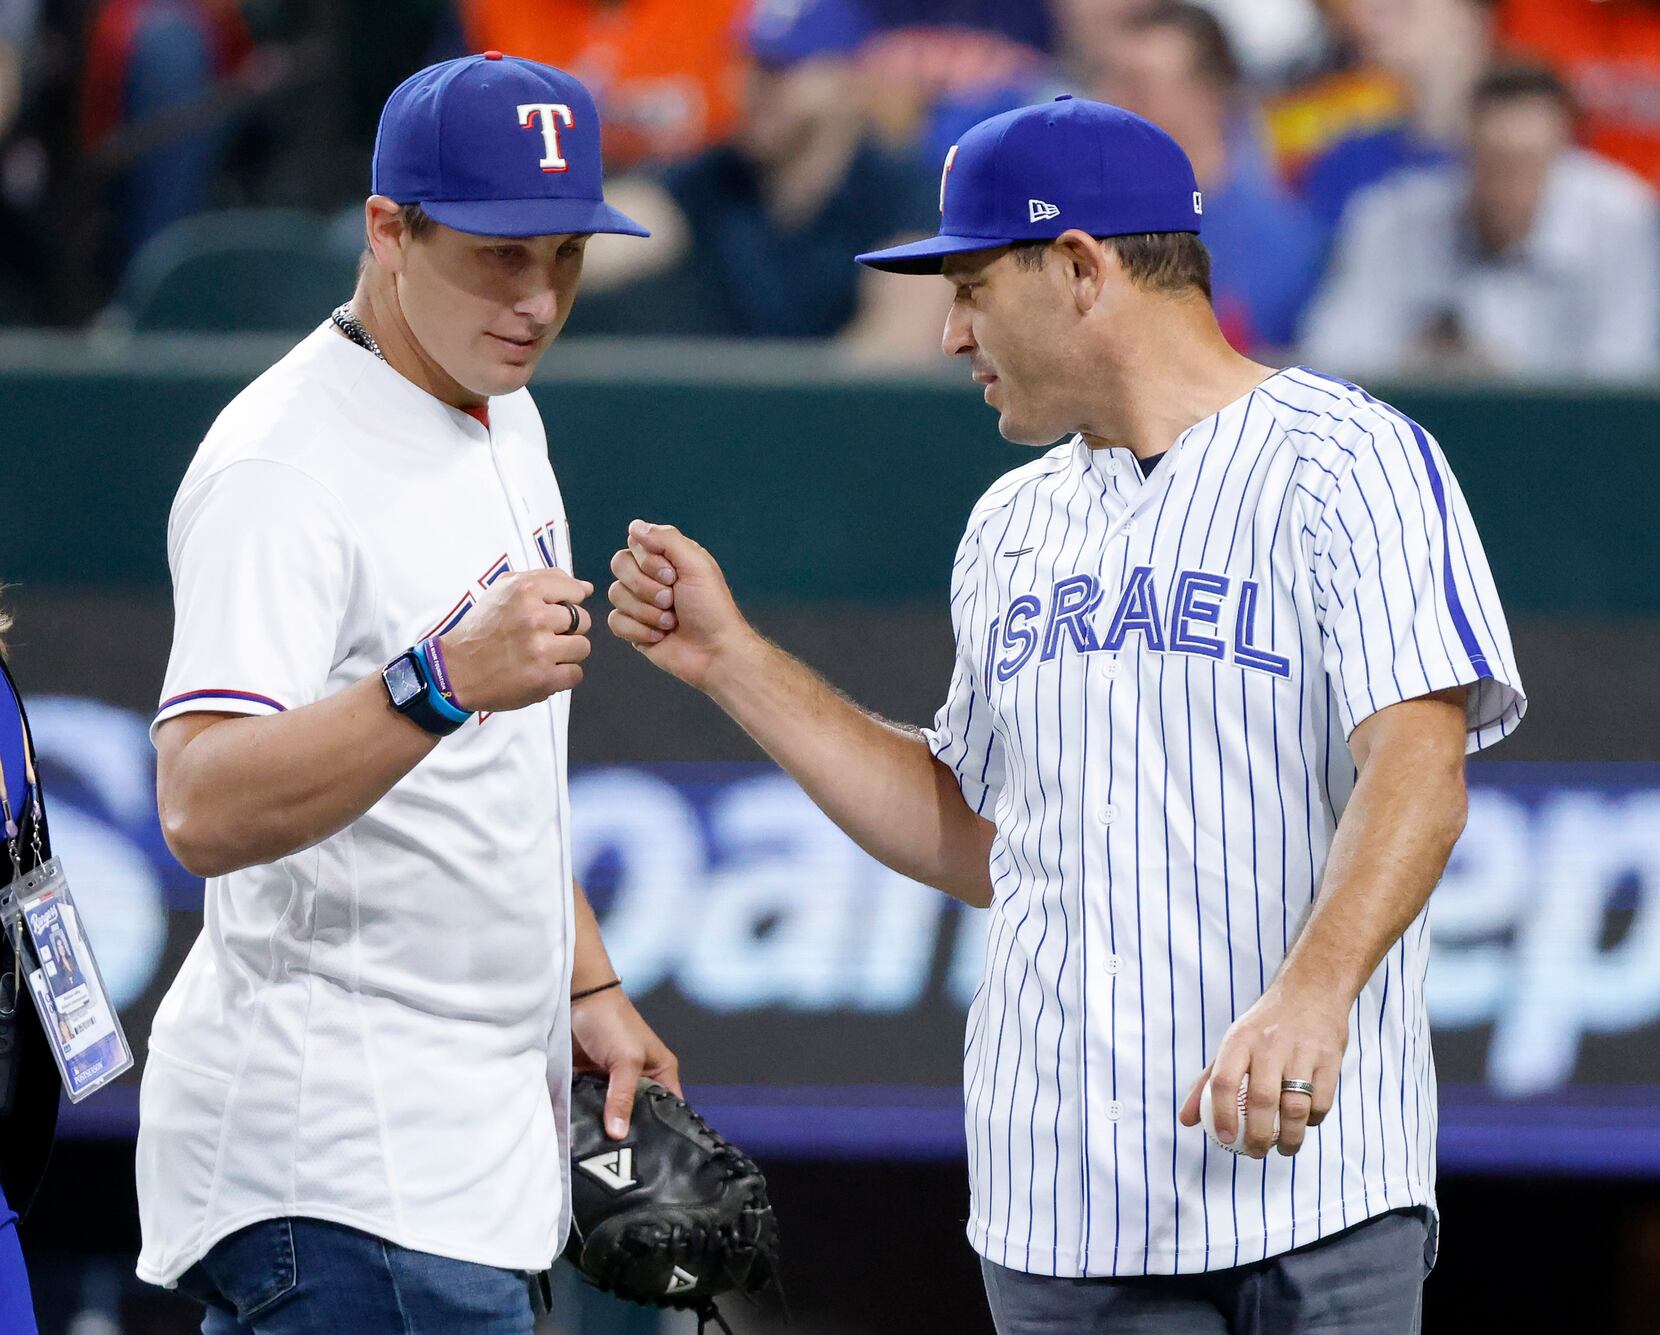 Ian Kinsler wears Team Israel jersey to throw out first pitch at Texas  Rangers playoff game - Texas Jewish Post